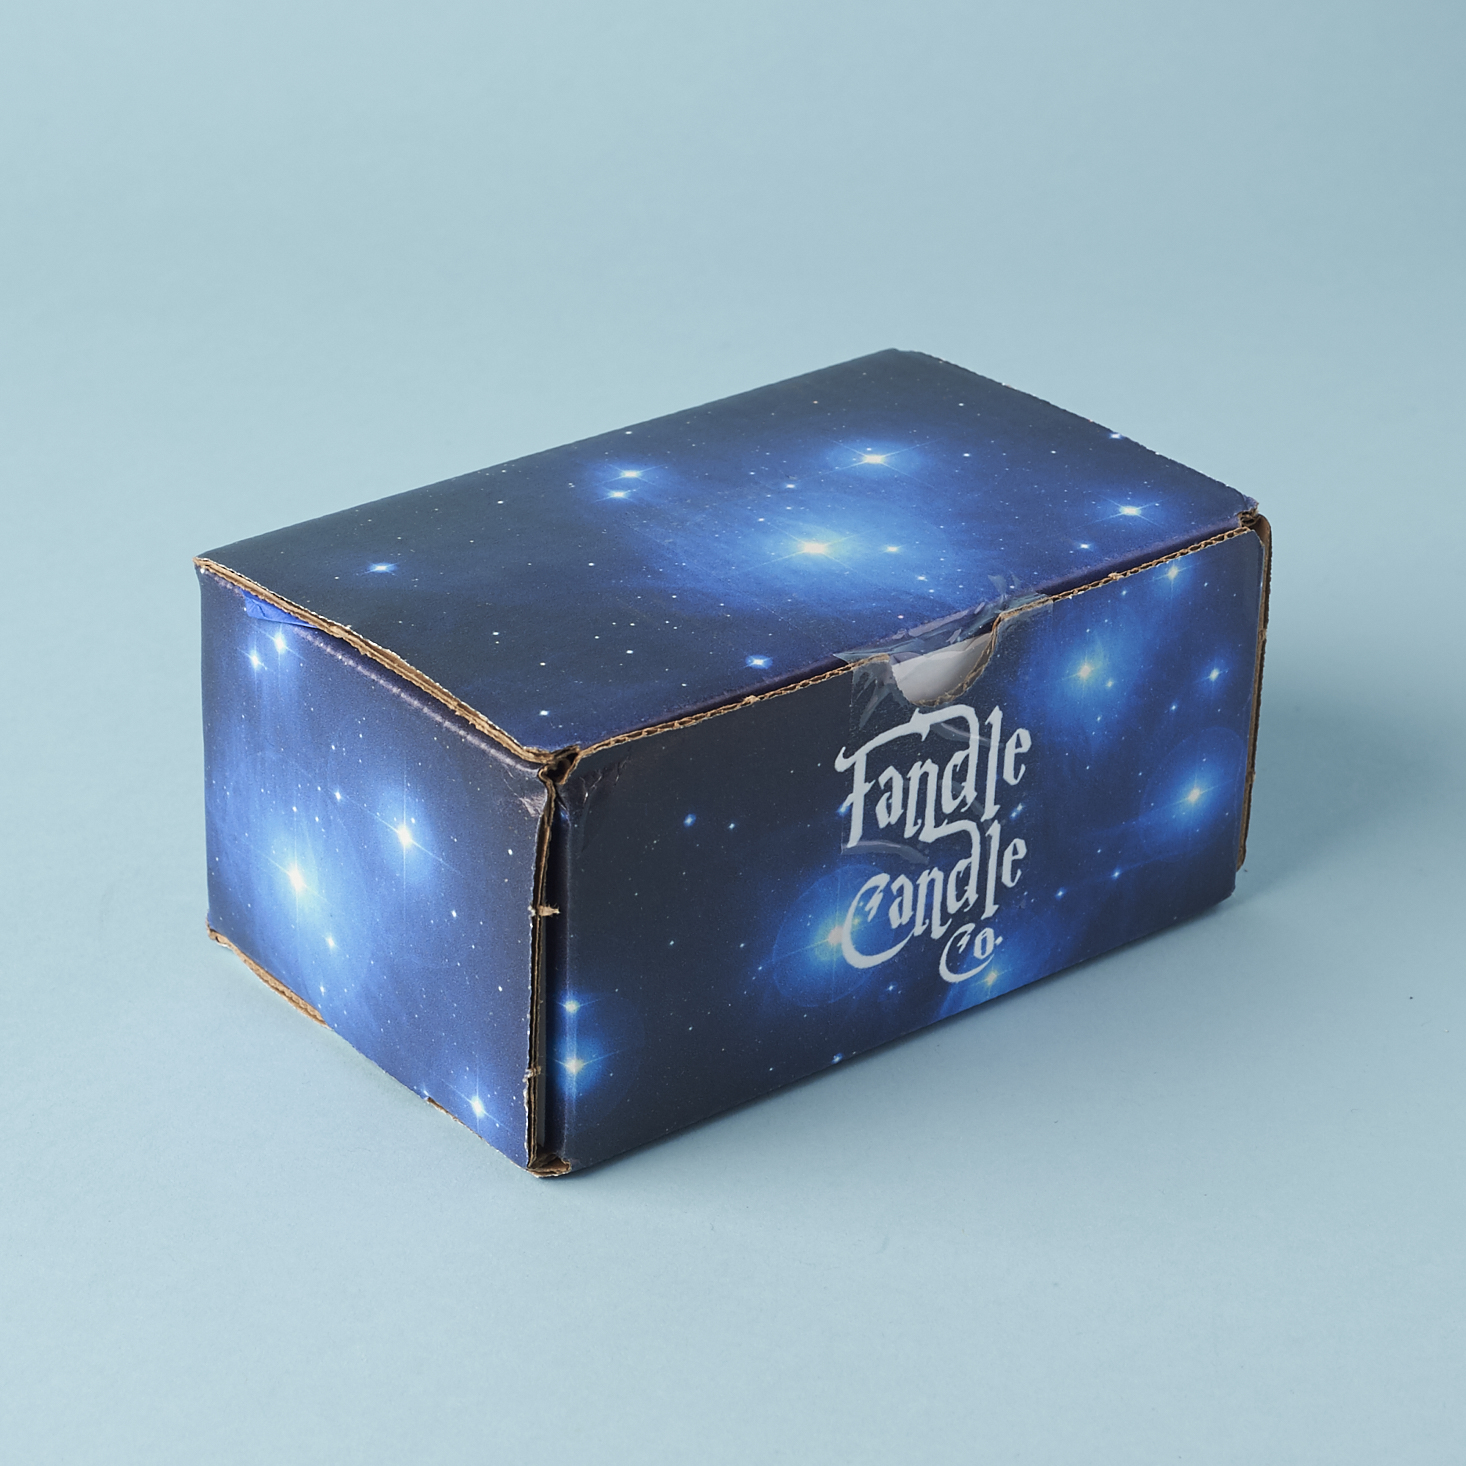 Fandle Candle Co. Box Review + Coupon – December 2016